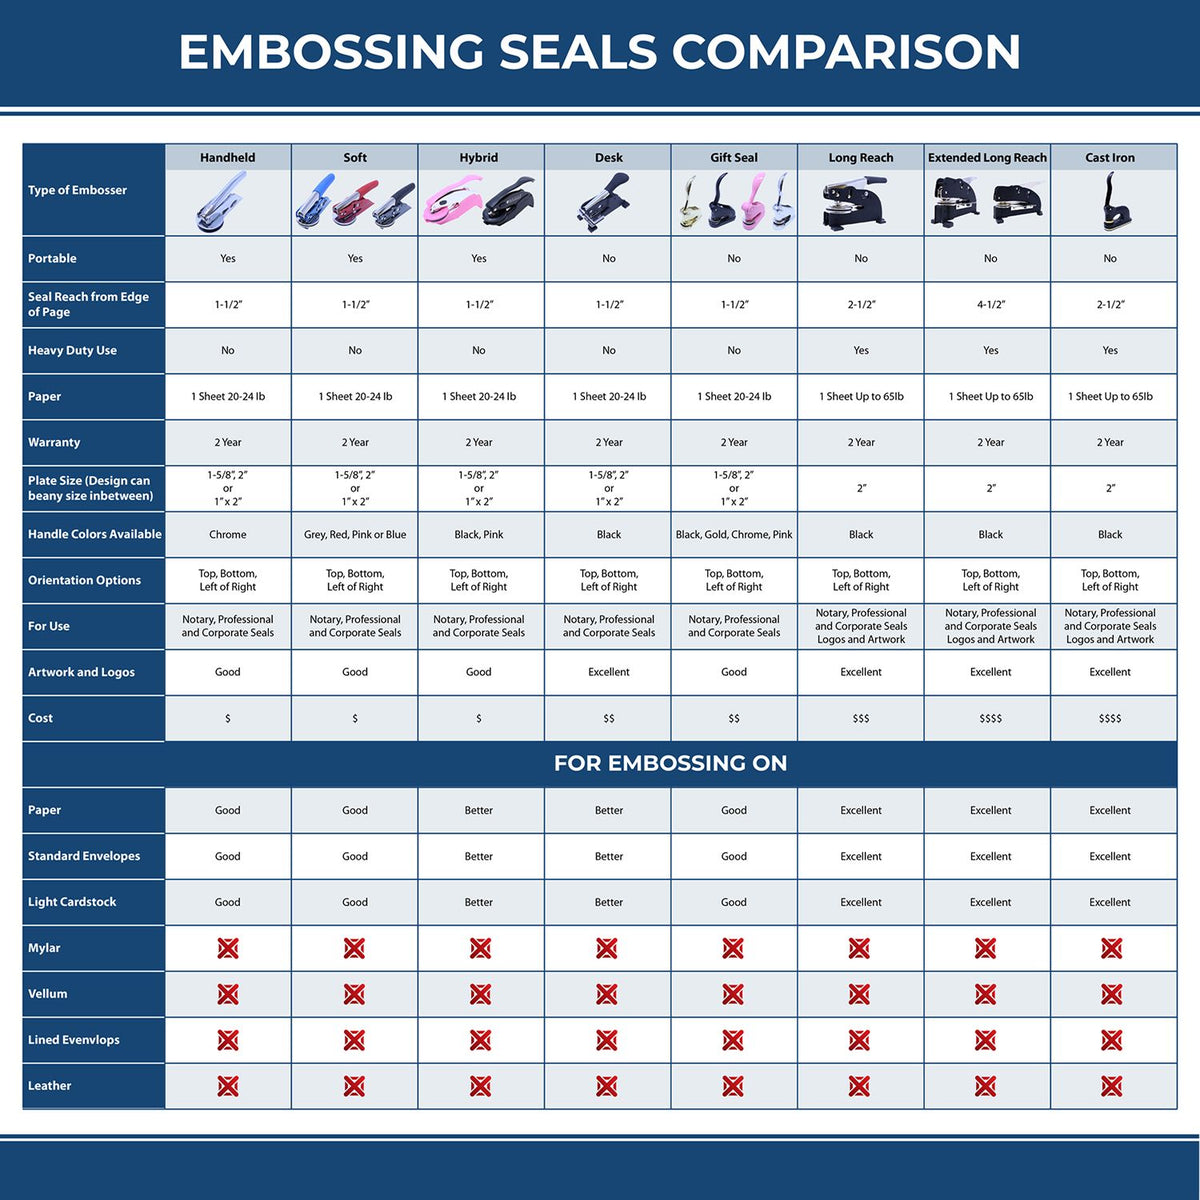 A comparison chart for the different types of mount models available for the Hybrid West Virginia Architect Seal